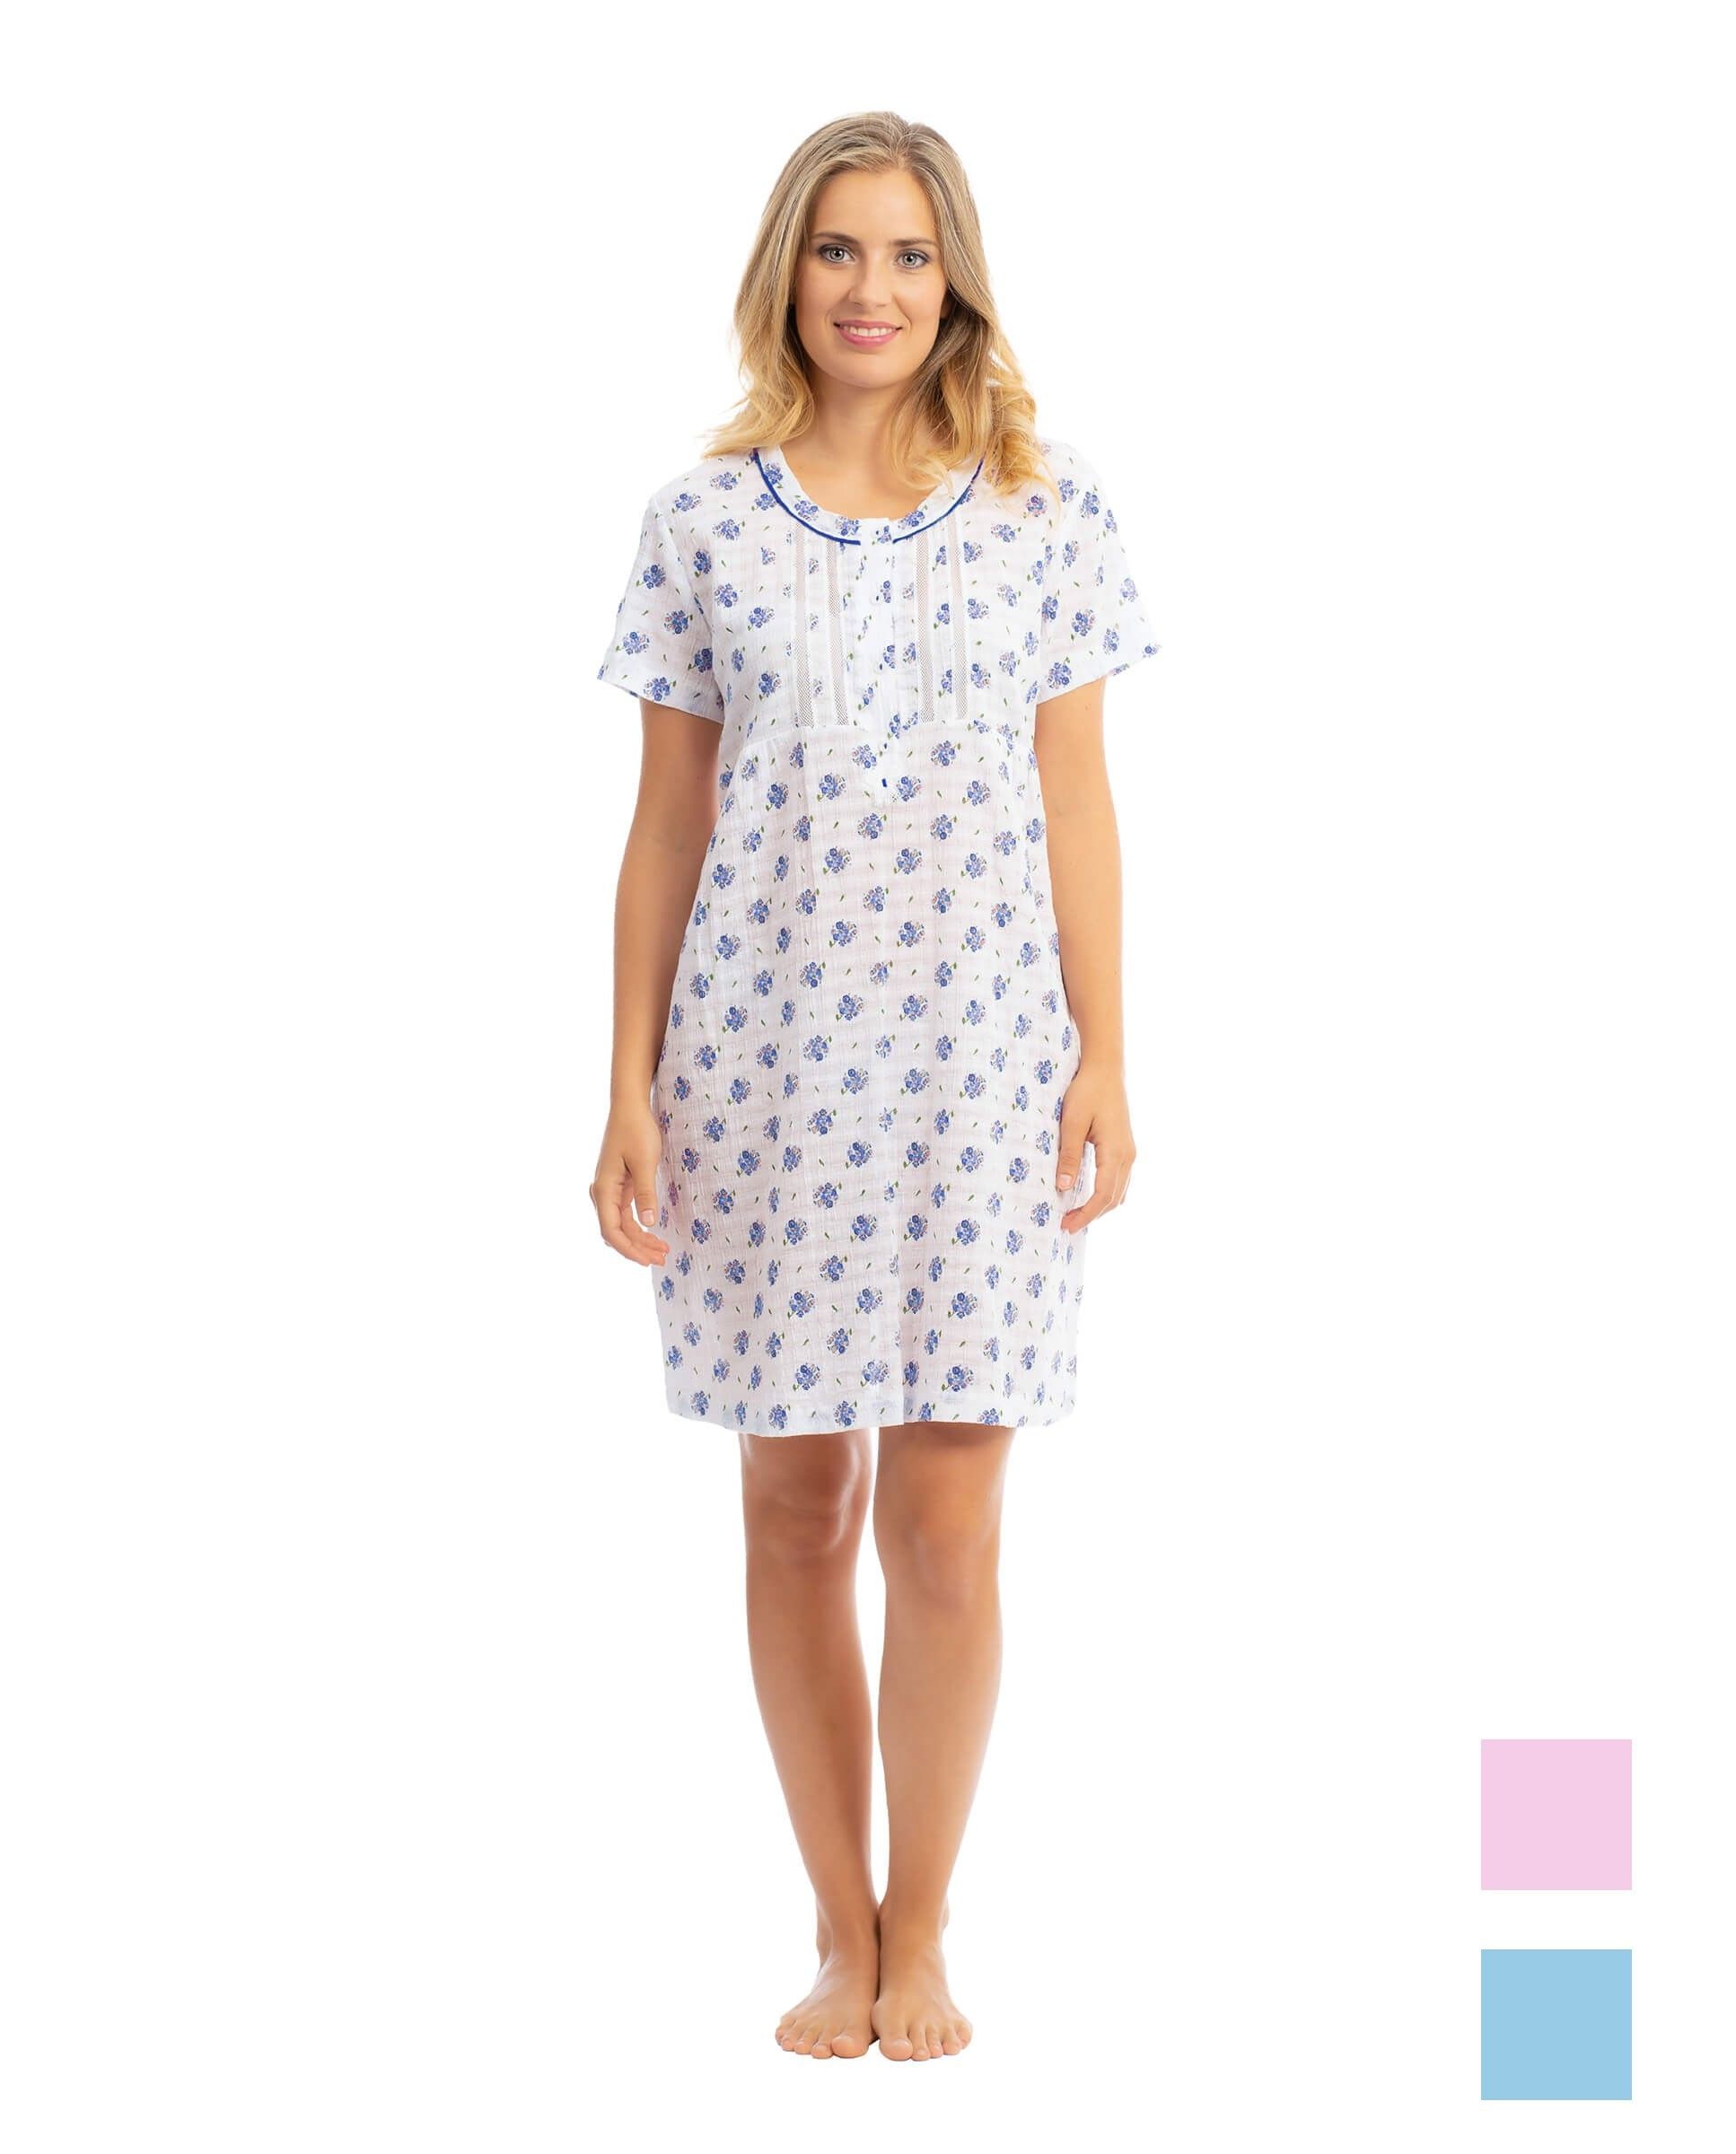 Women's short-sleeved summer nightdress with delicate blue wildflower print for women